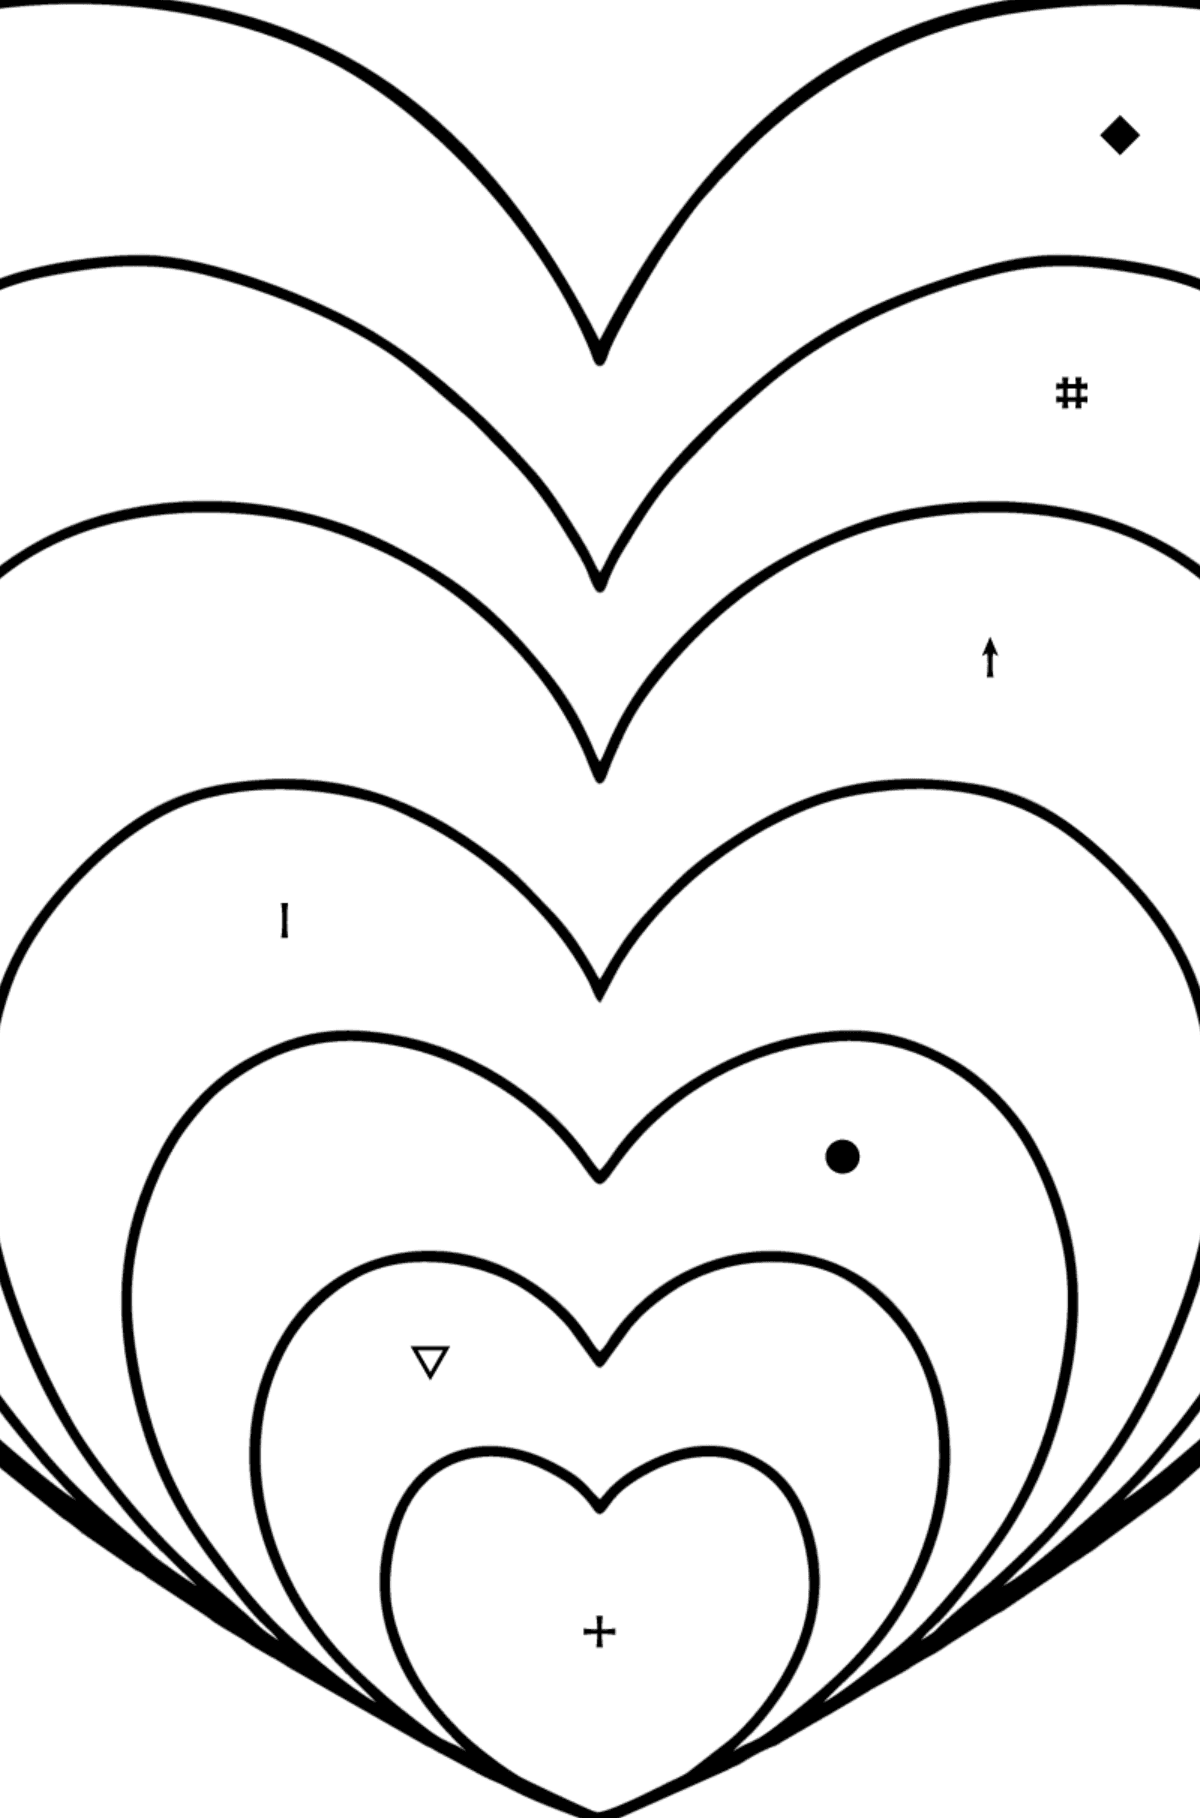 Simple Zen heart coloring page - Coloring by Symbols for Kids